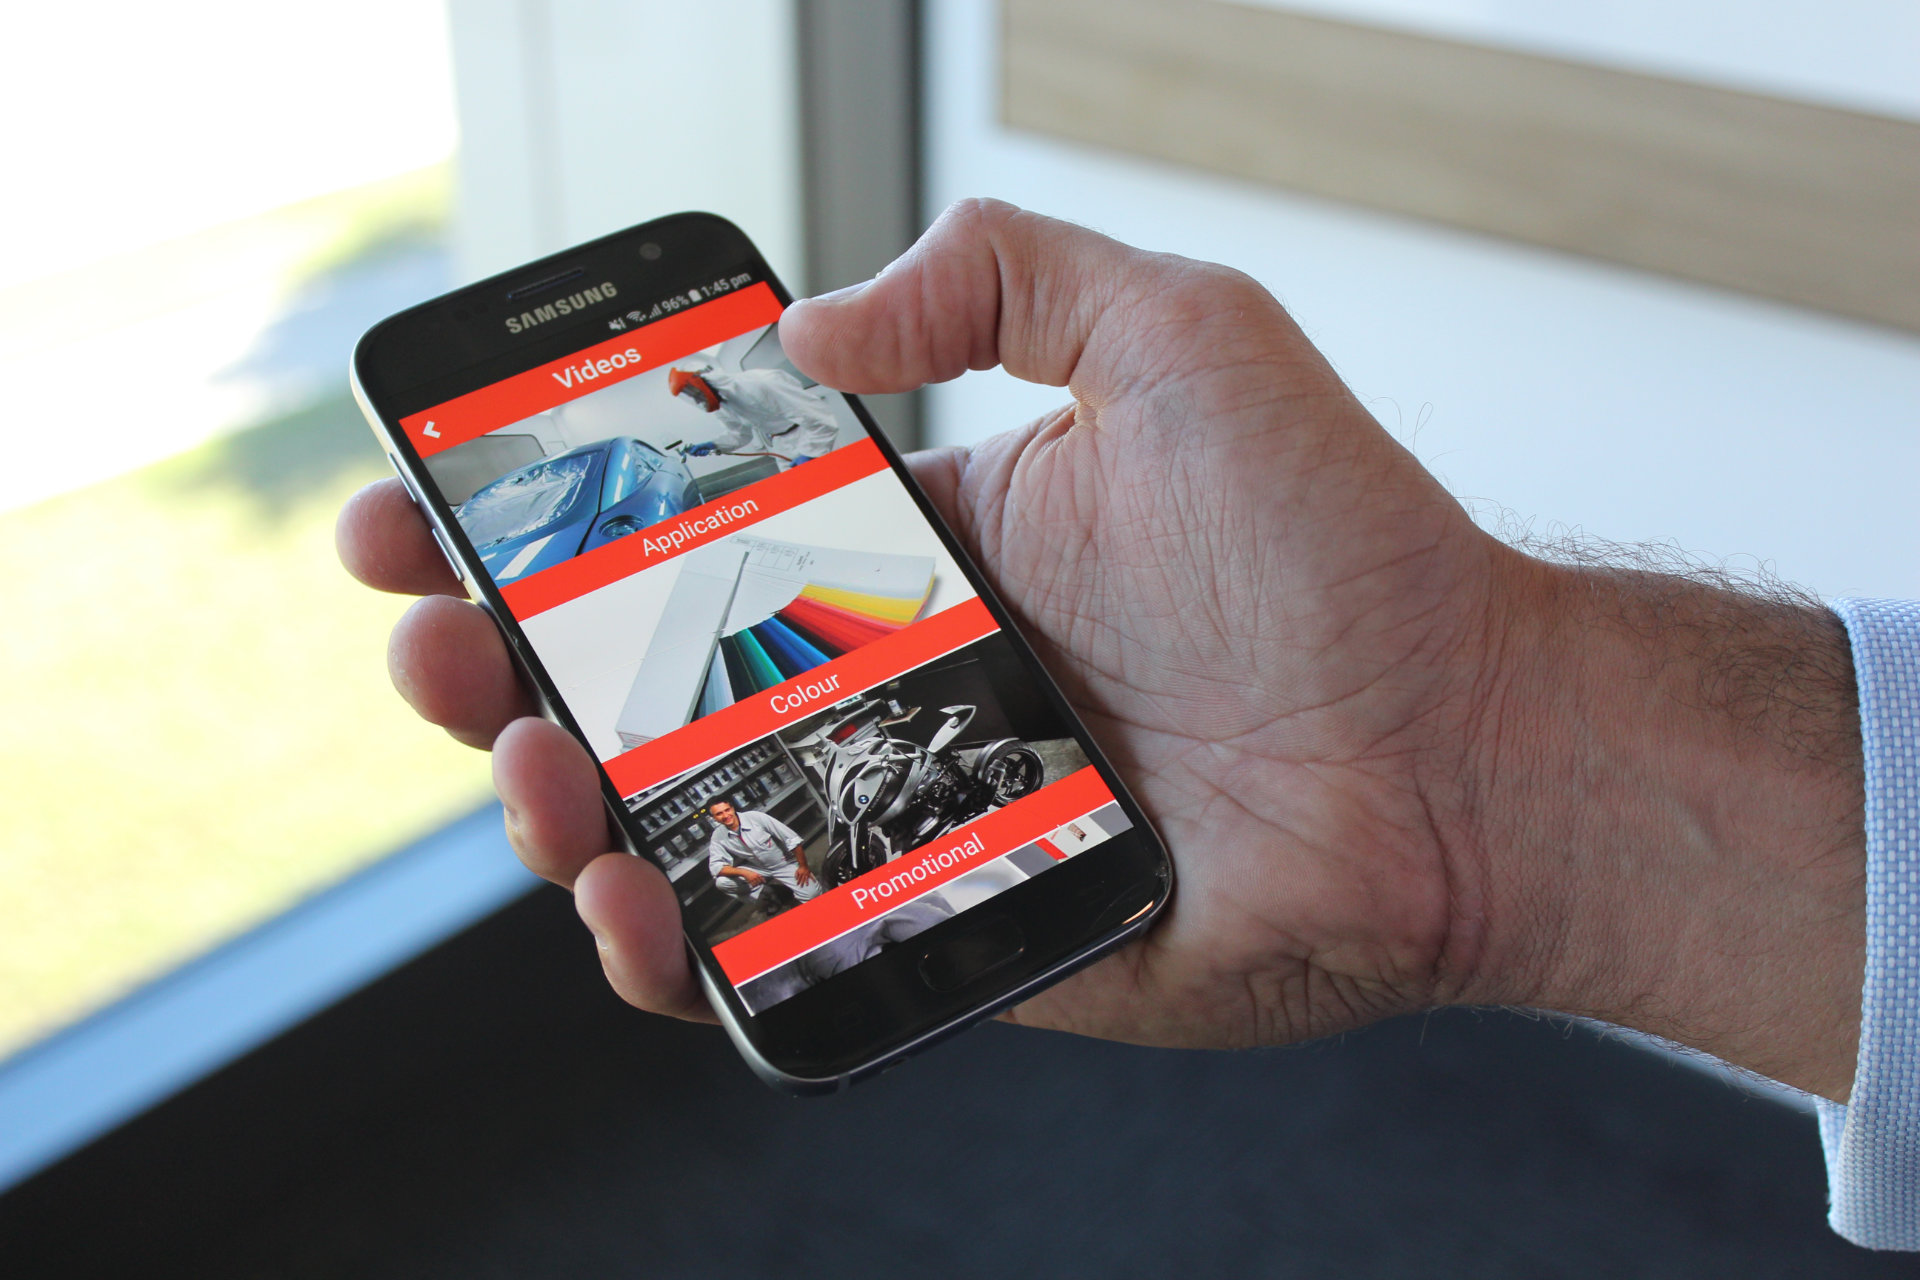 Axalta Launches Spies Hecker App In Australia For Refinishers